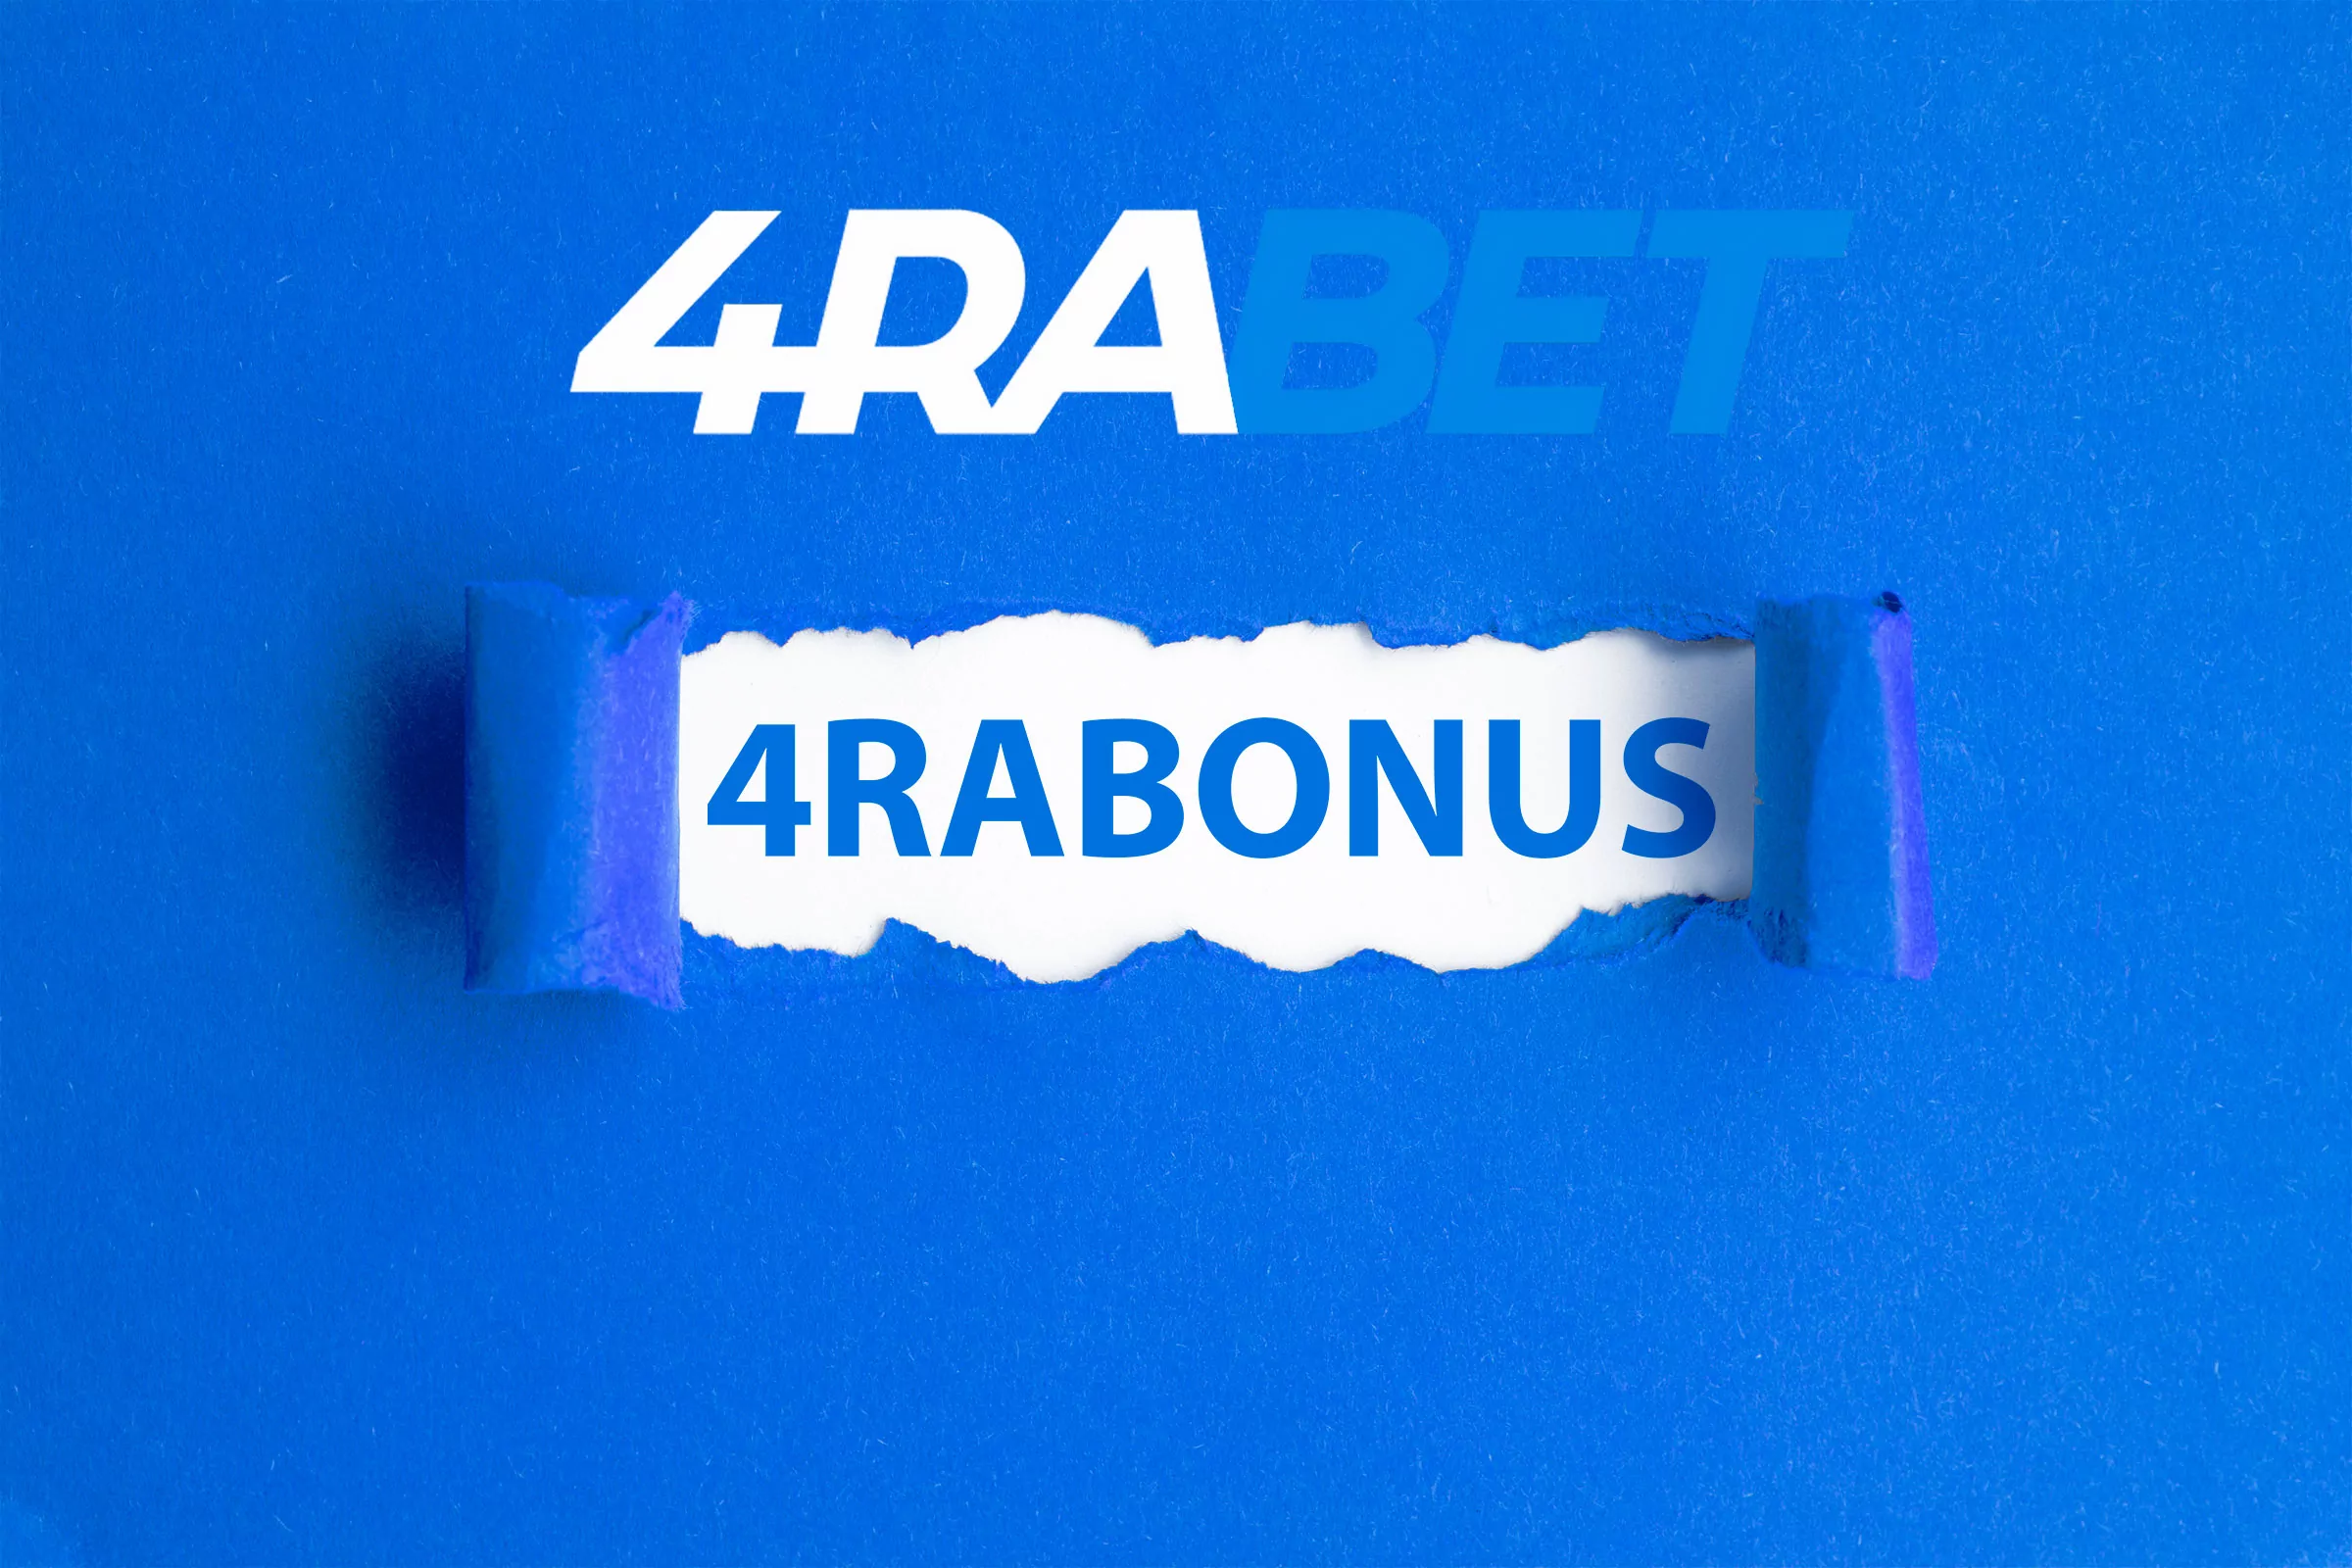 Use promo code 4RABONUS when you register your account and get a 200 percent bonus on your first deposit!